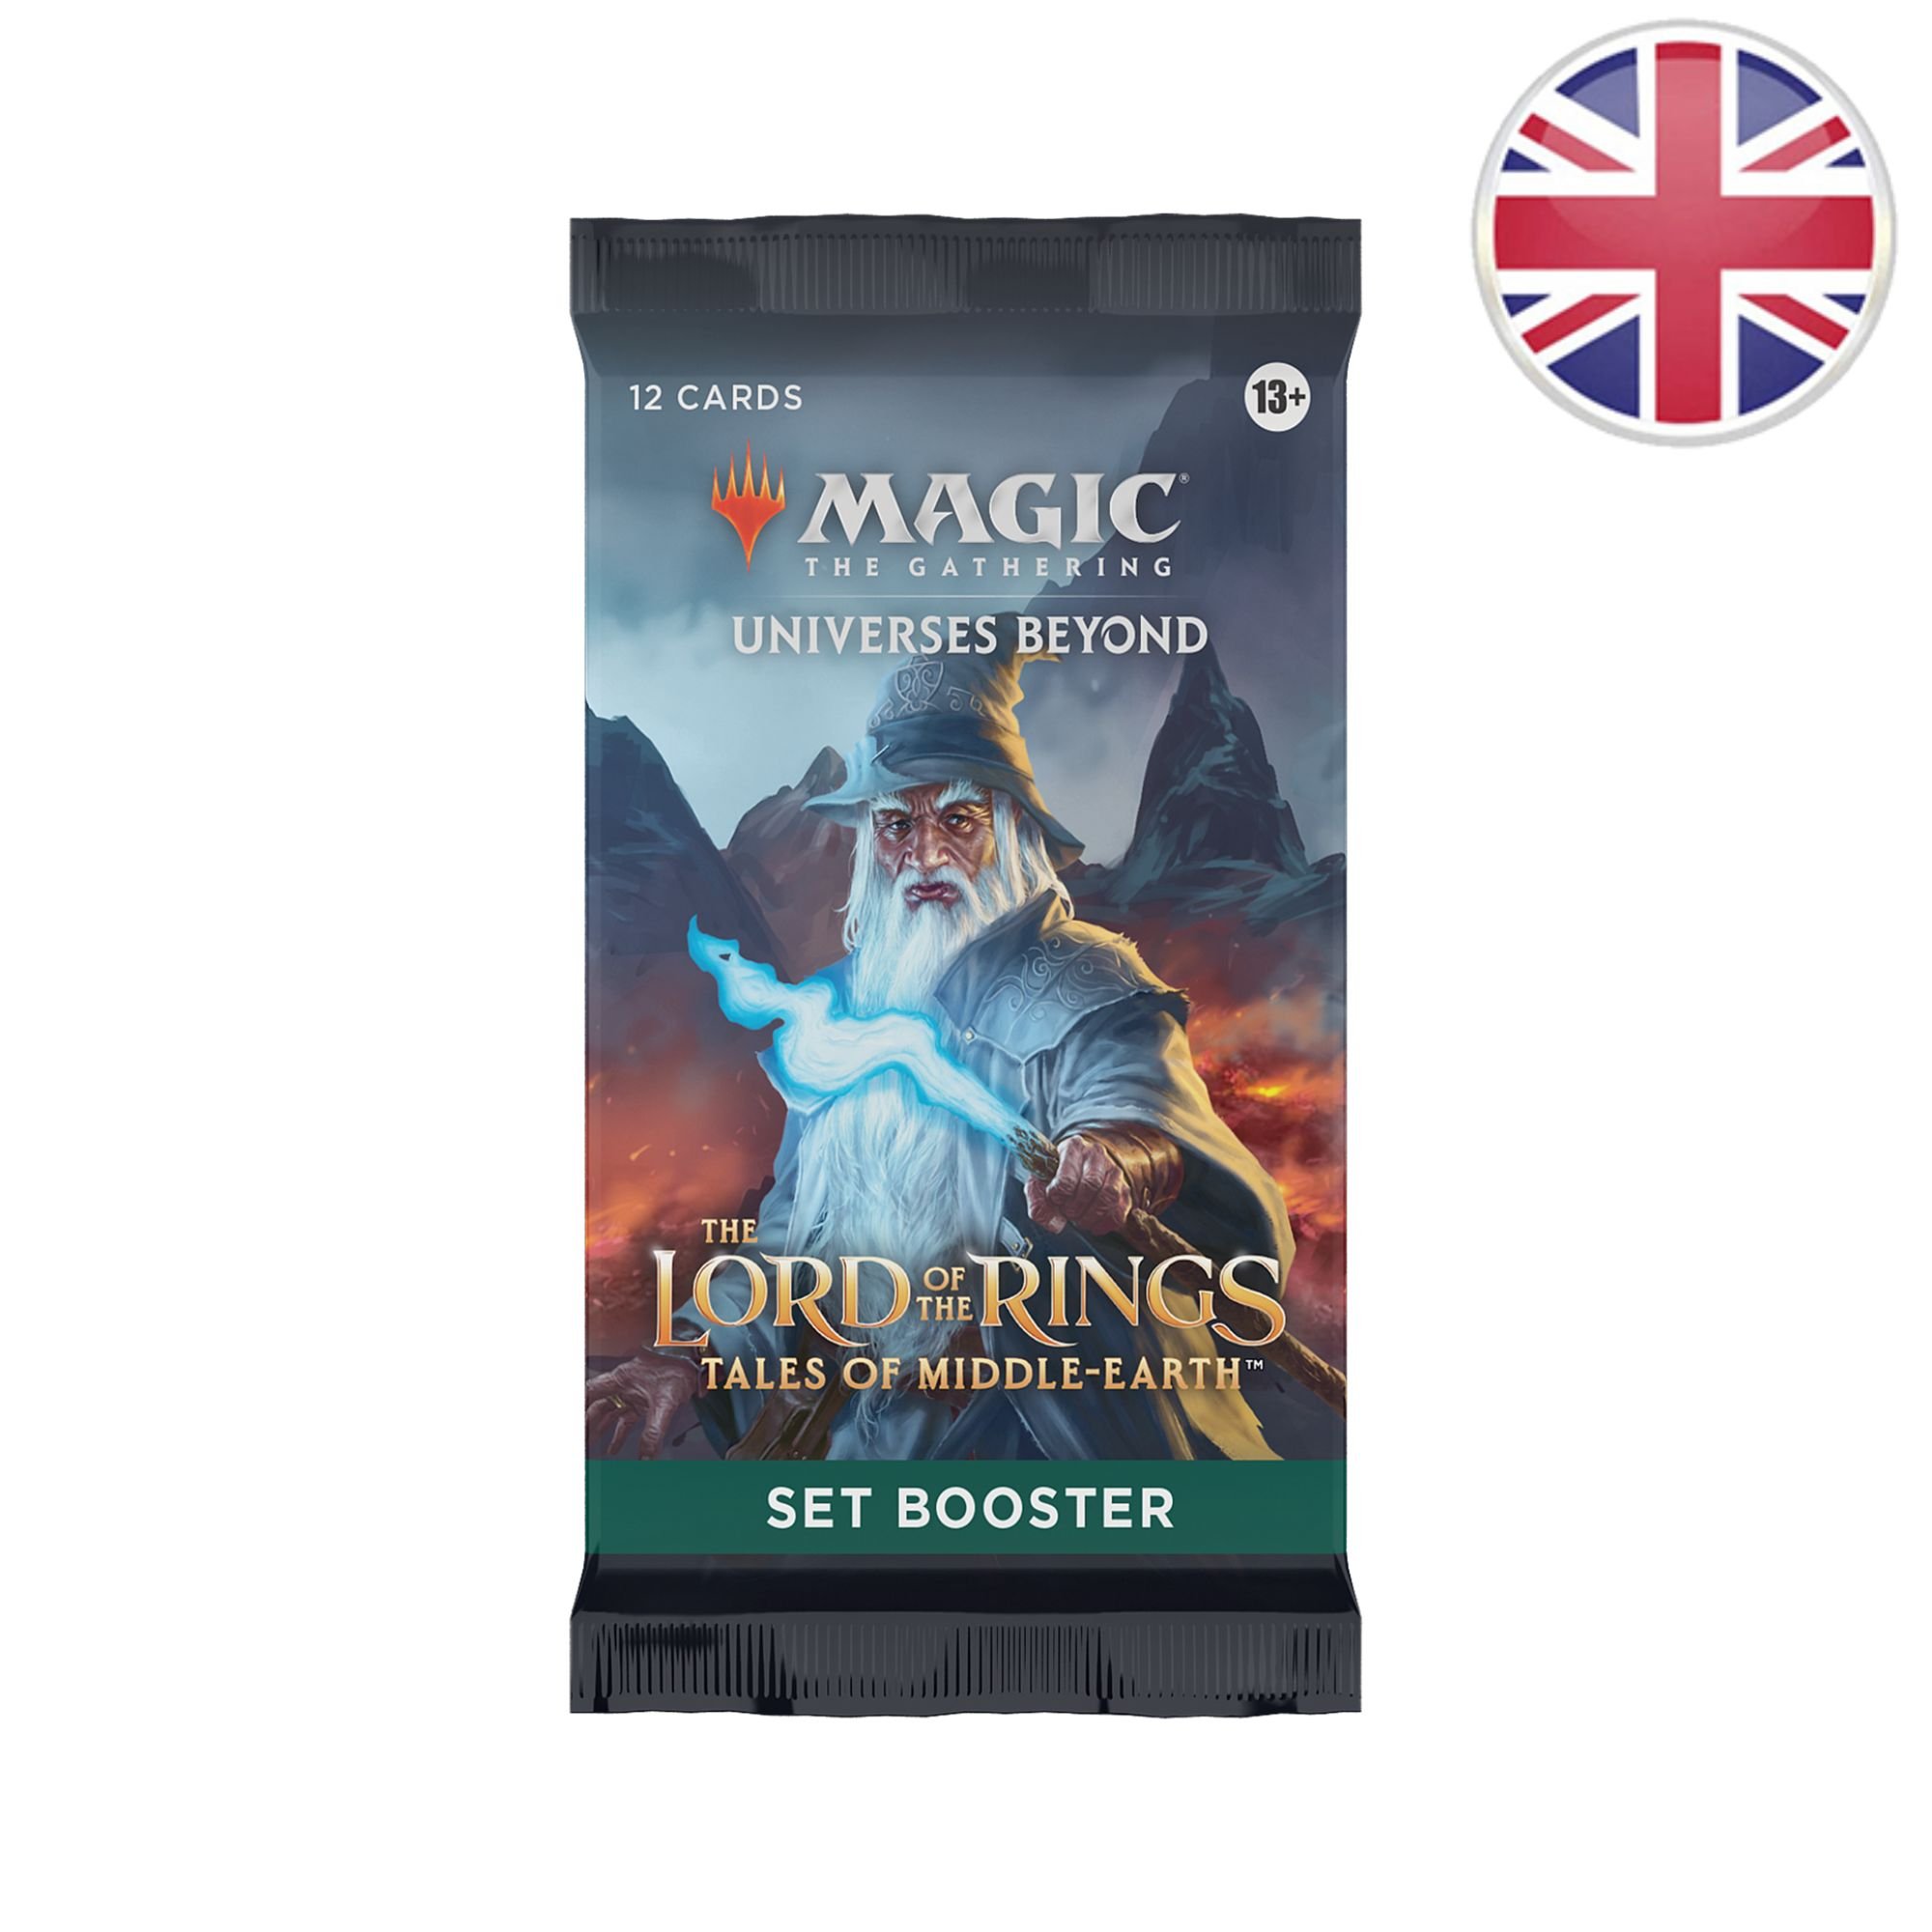 The Lord of the Rings: Tales of Middle-Earth - Set Booster Box